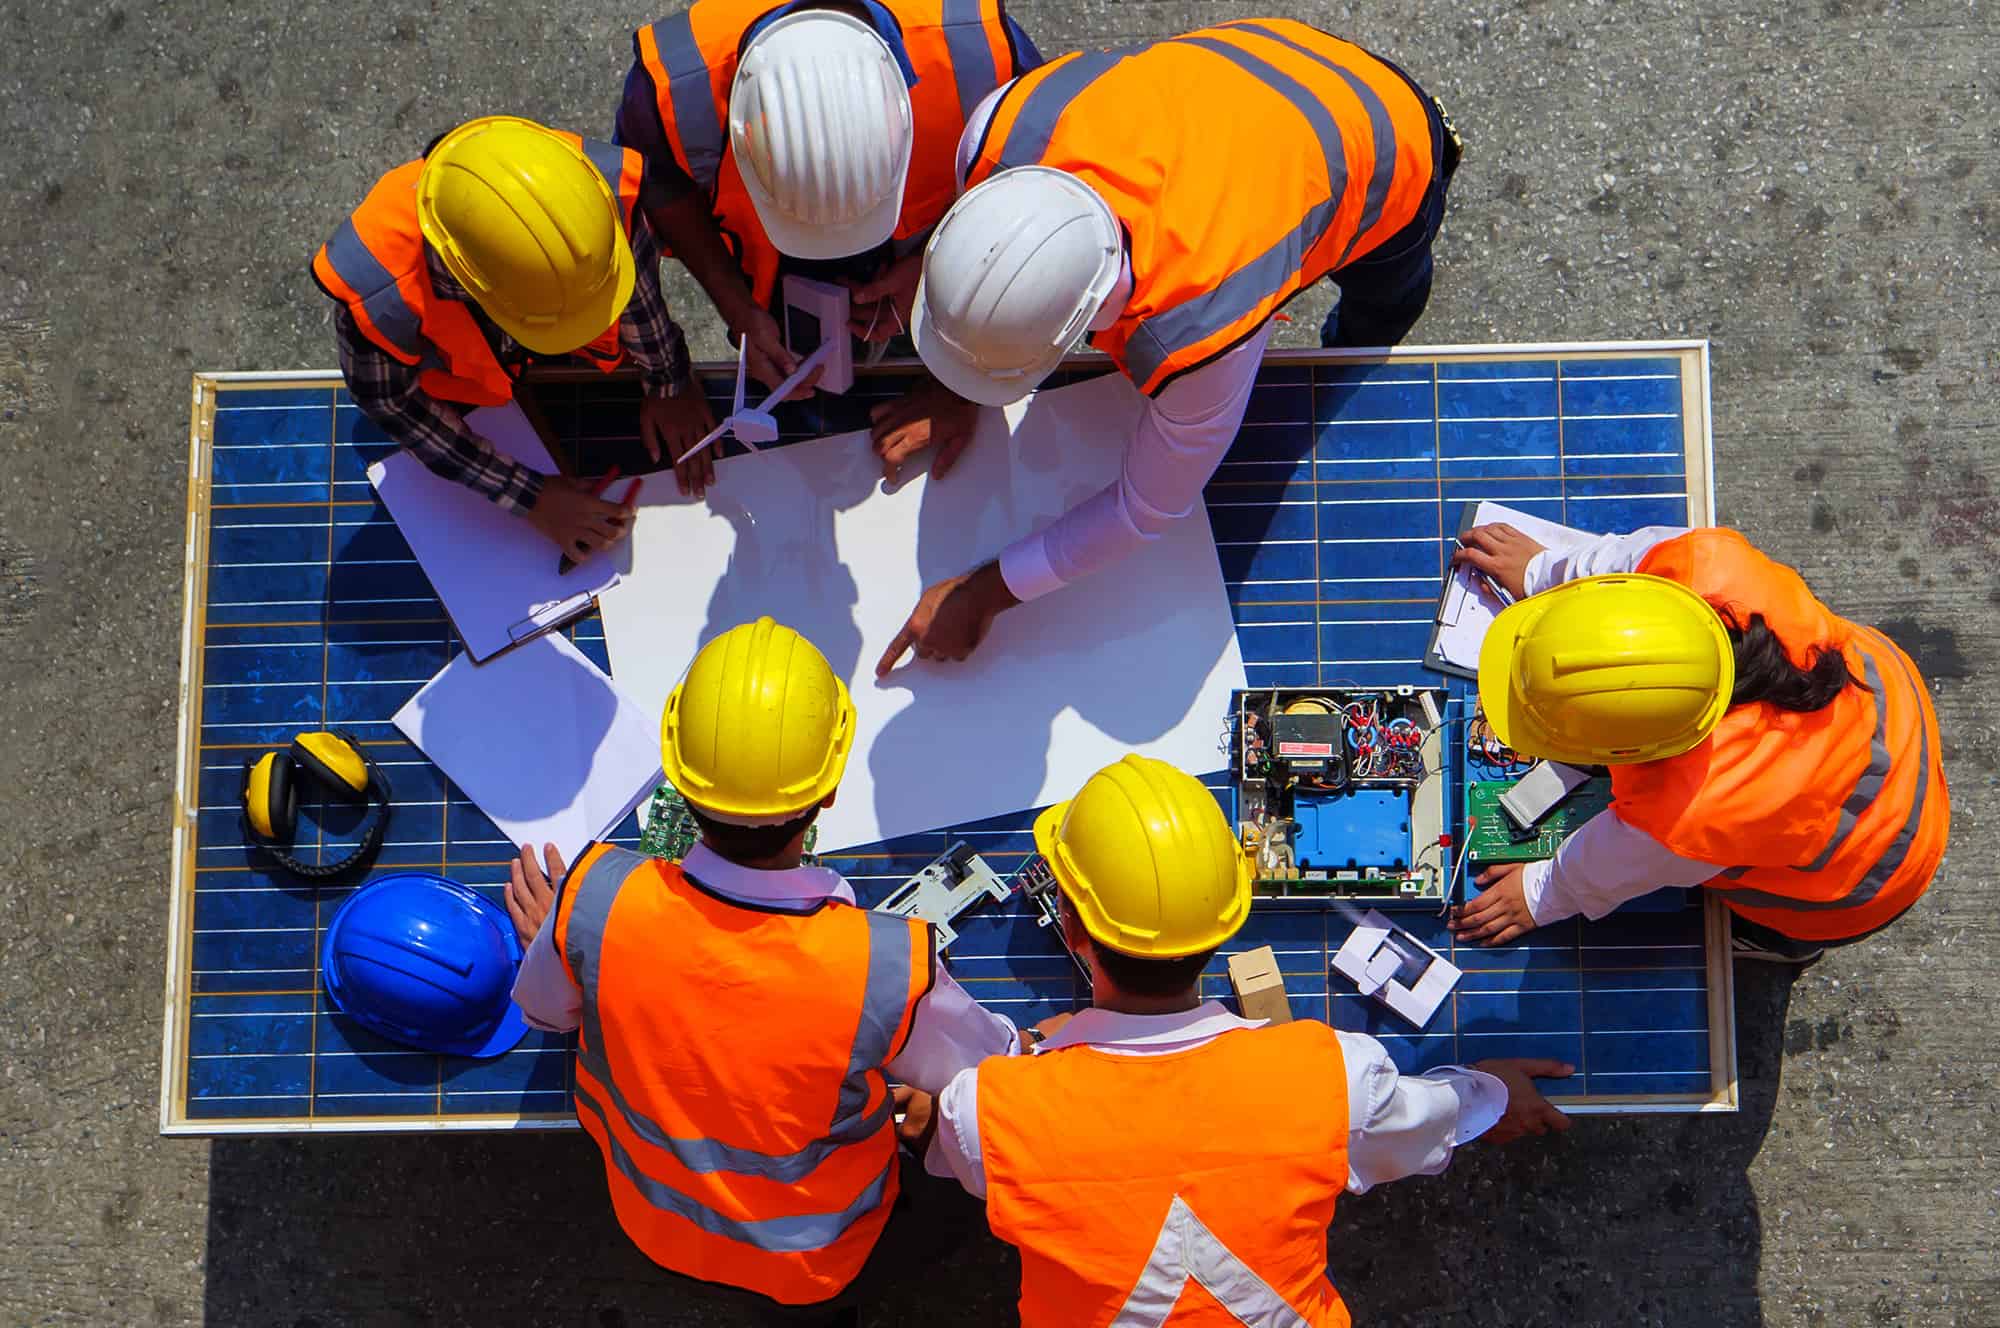 Construction workers in high visibility vests and safety helmets discussing plans over a blueprint with a solar panel nearby.